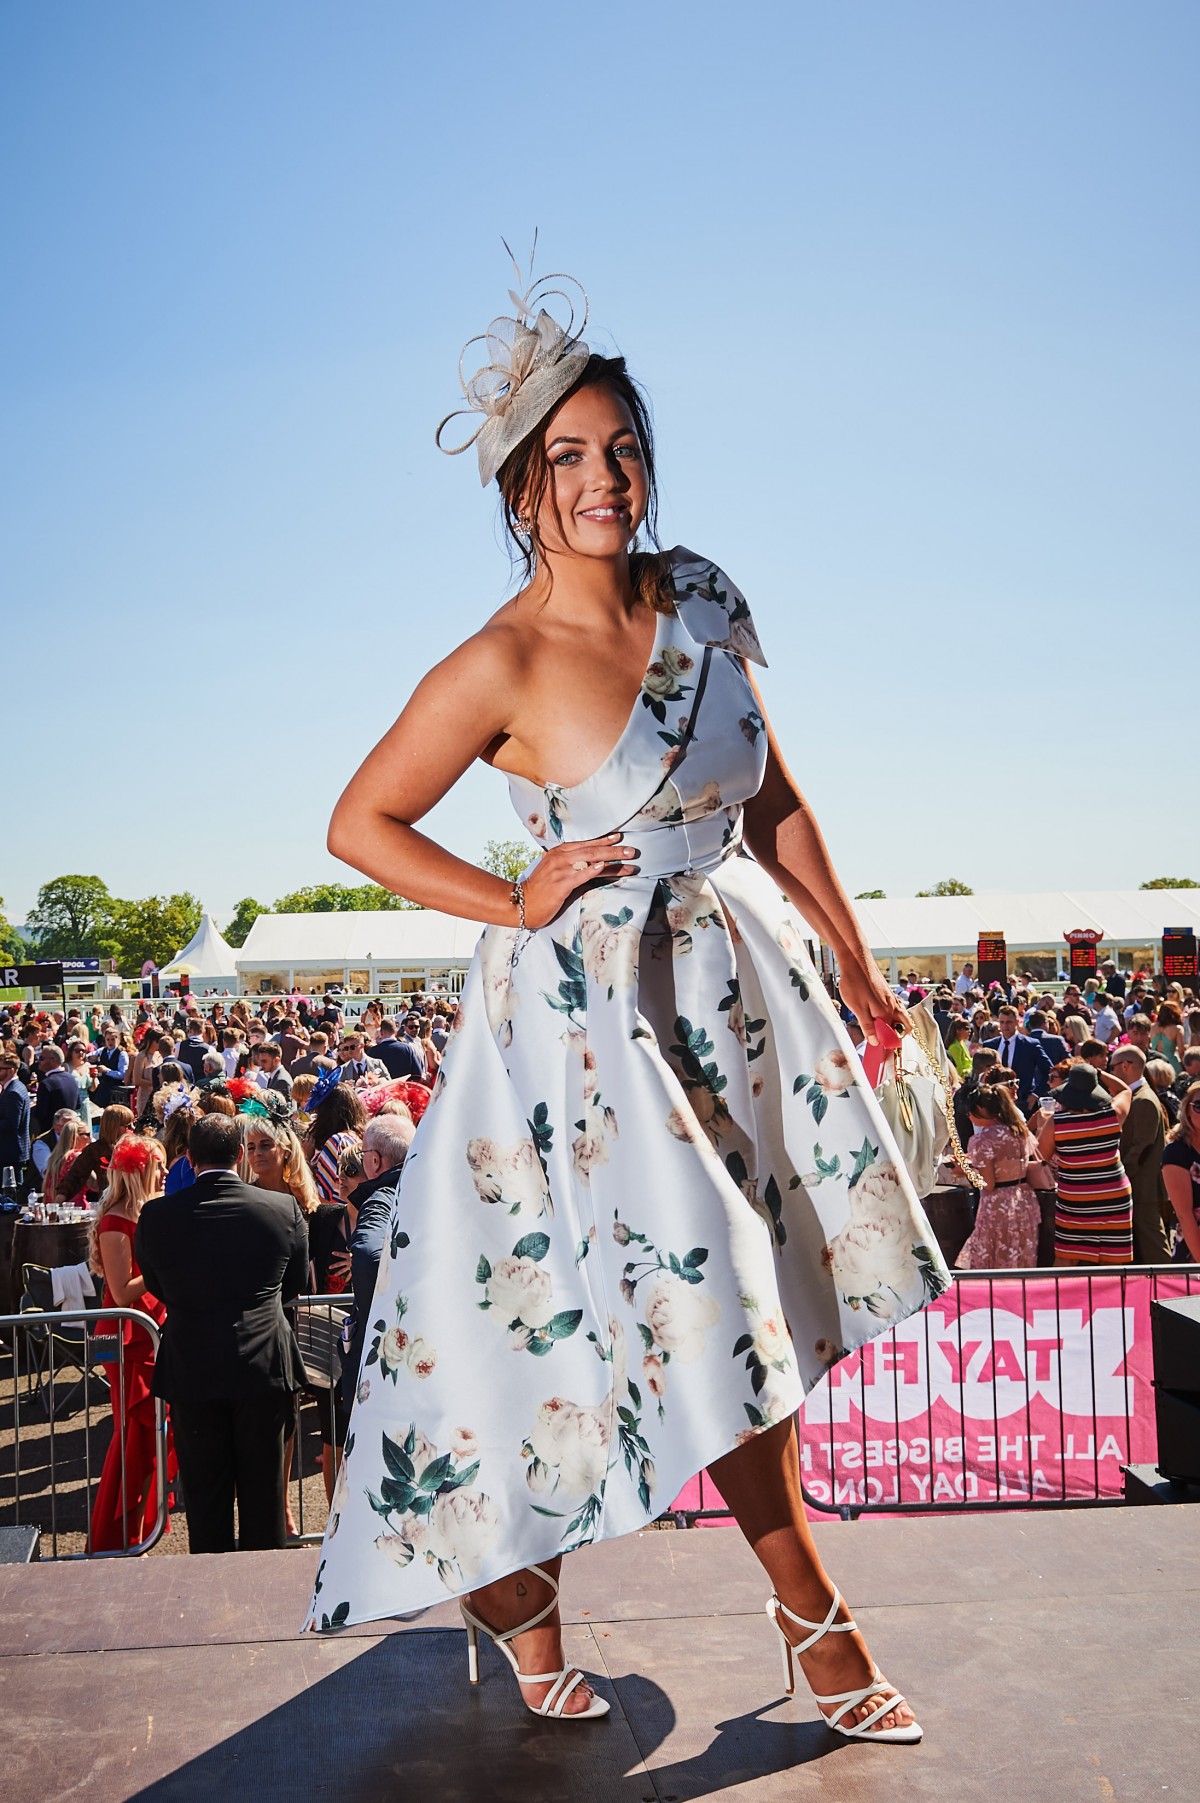 Roxanne Hausrath wowed the judges with this gorgeous dress and bagged herself the title of Perth Racecourse Ladies Day Grand Lady 2019! She won £1000 and £1000 vouchers for Eva Lucia.  Well done Roxanne!